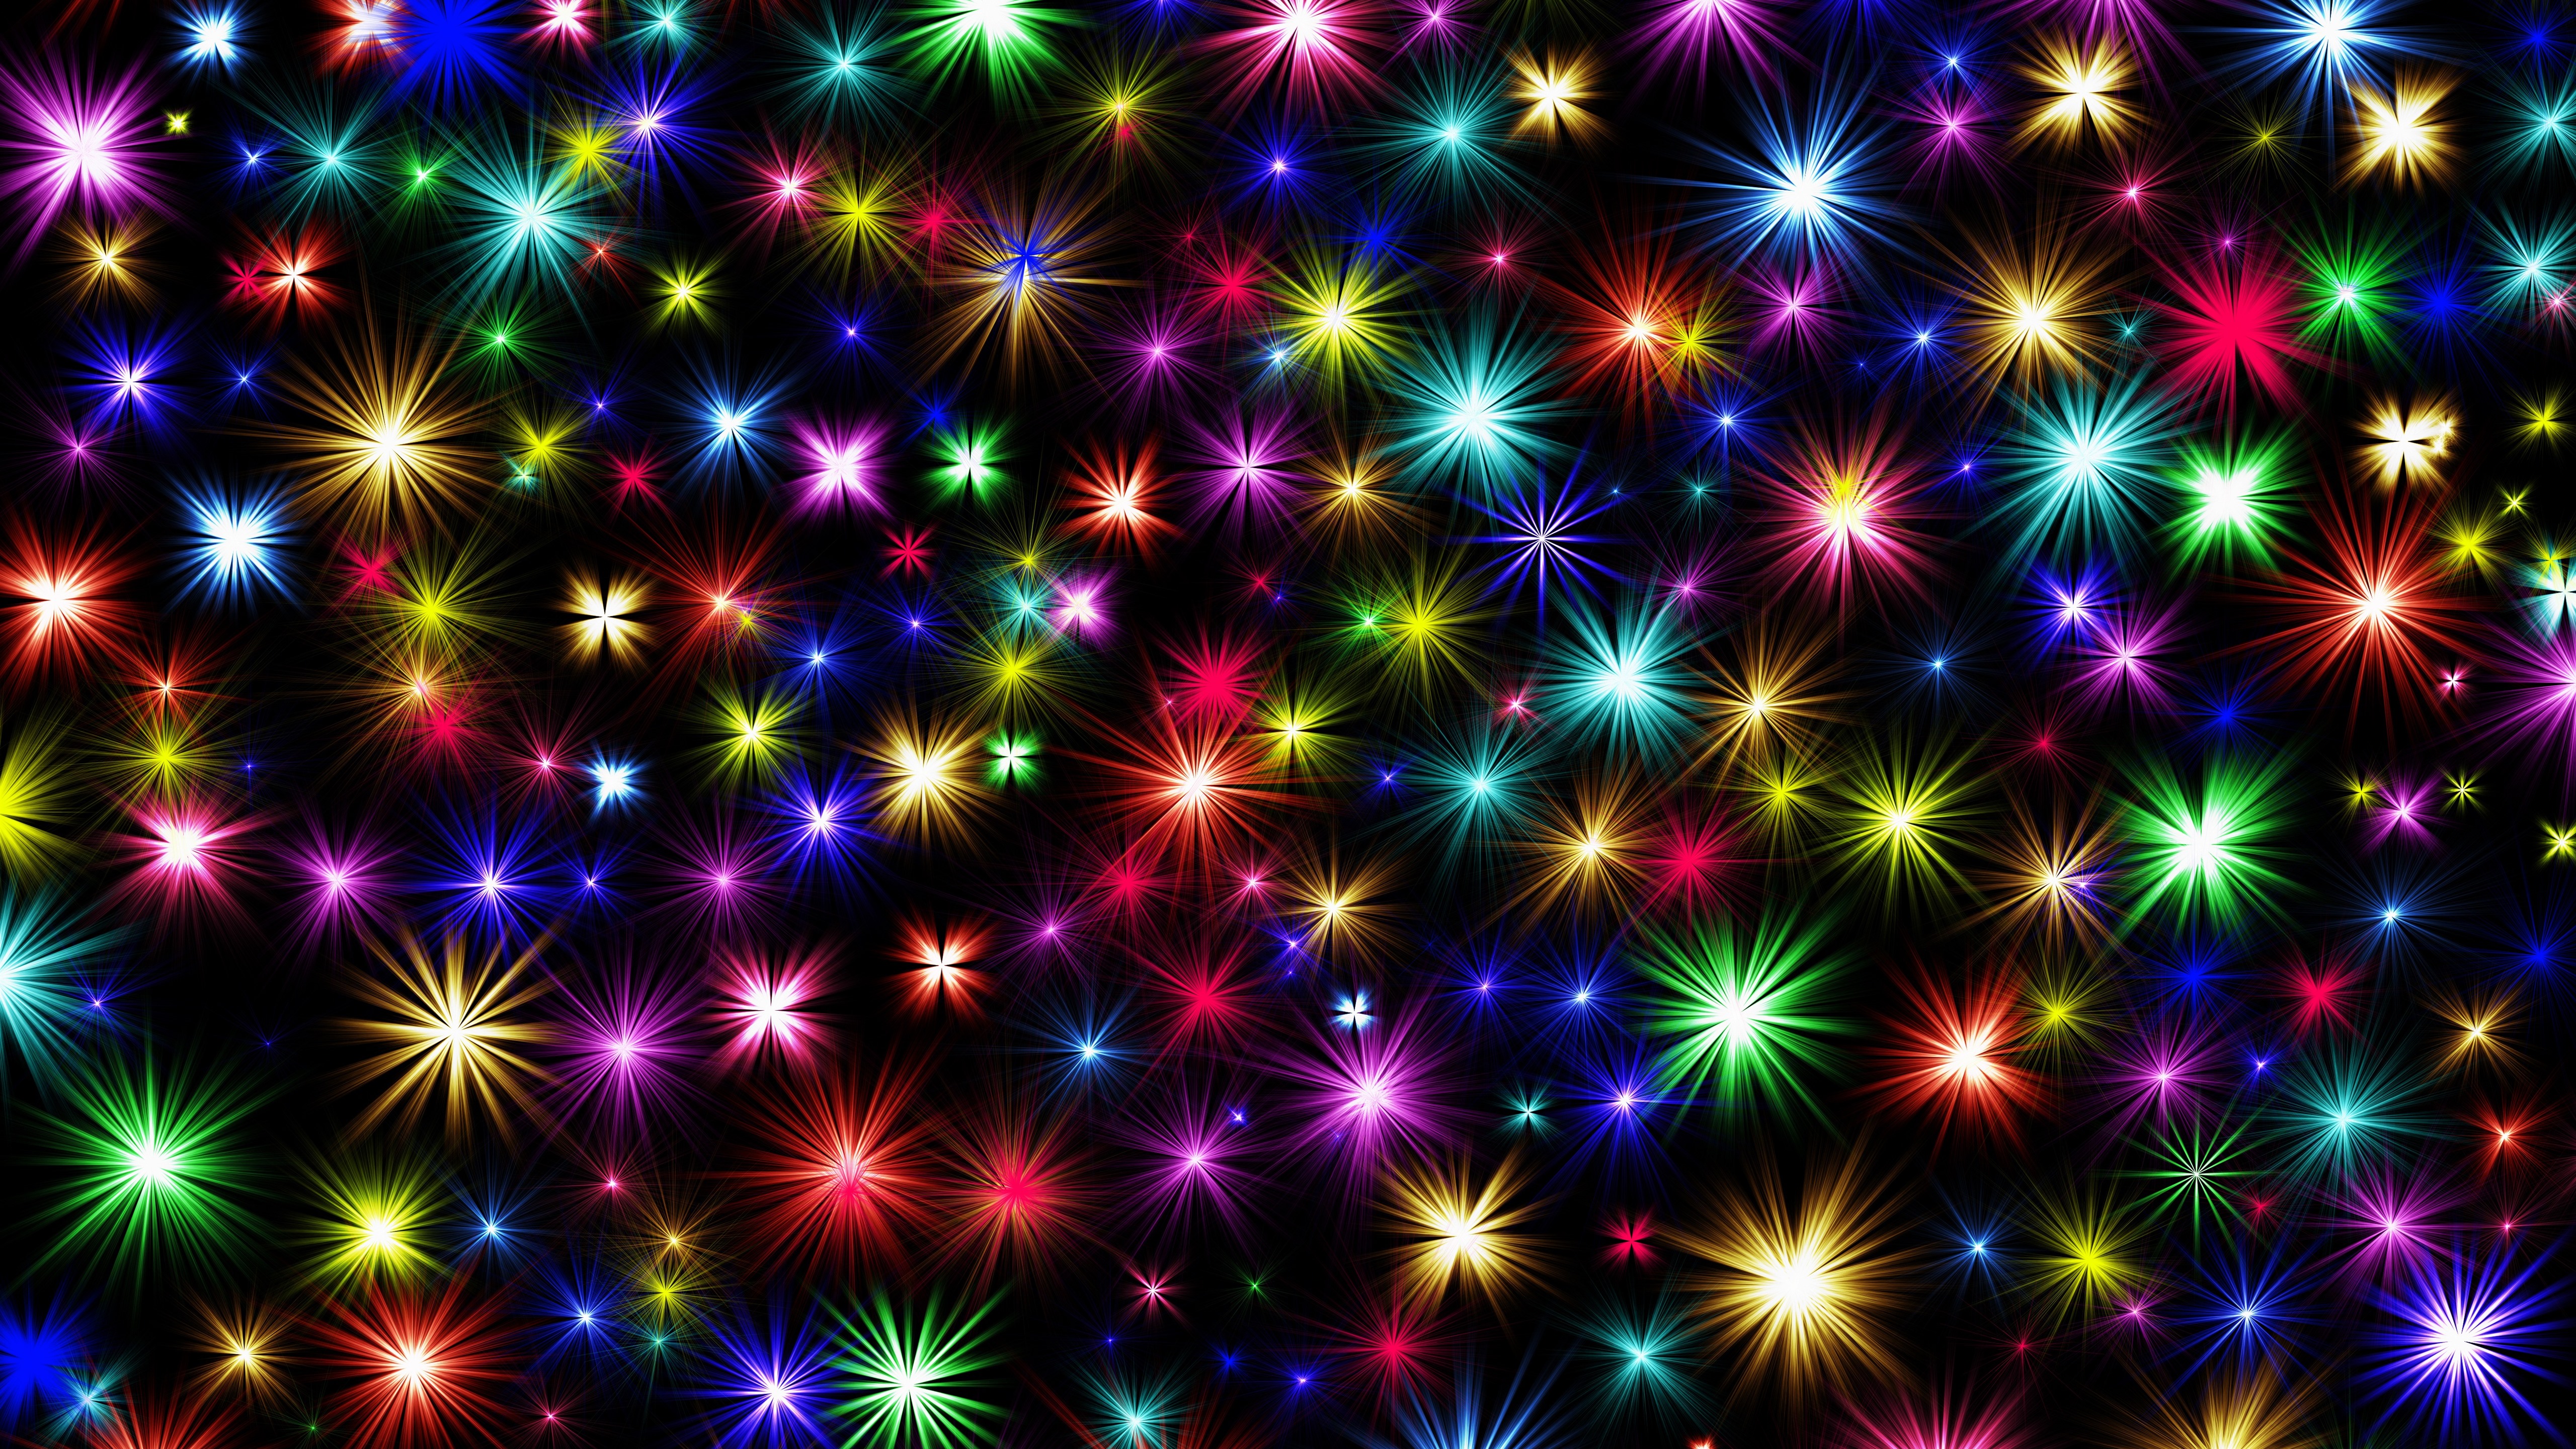 Wallpaper Colorful Stars, Shine, Black Background - Backgrounds With Sparks  - 5120x2880 Wallpaper 